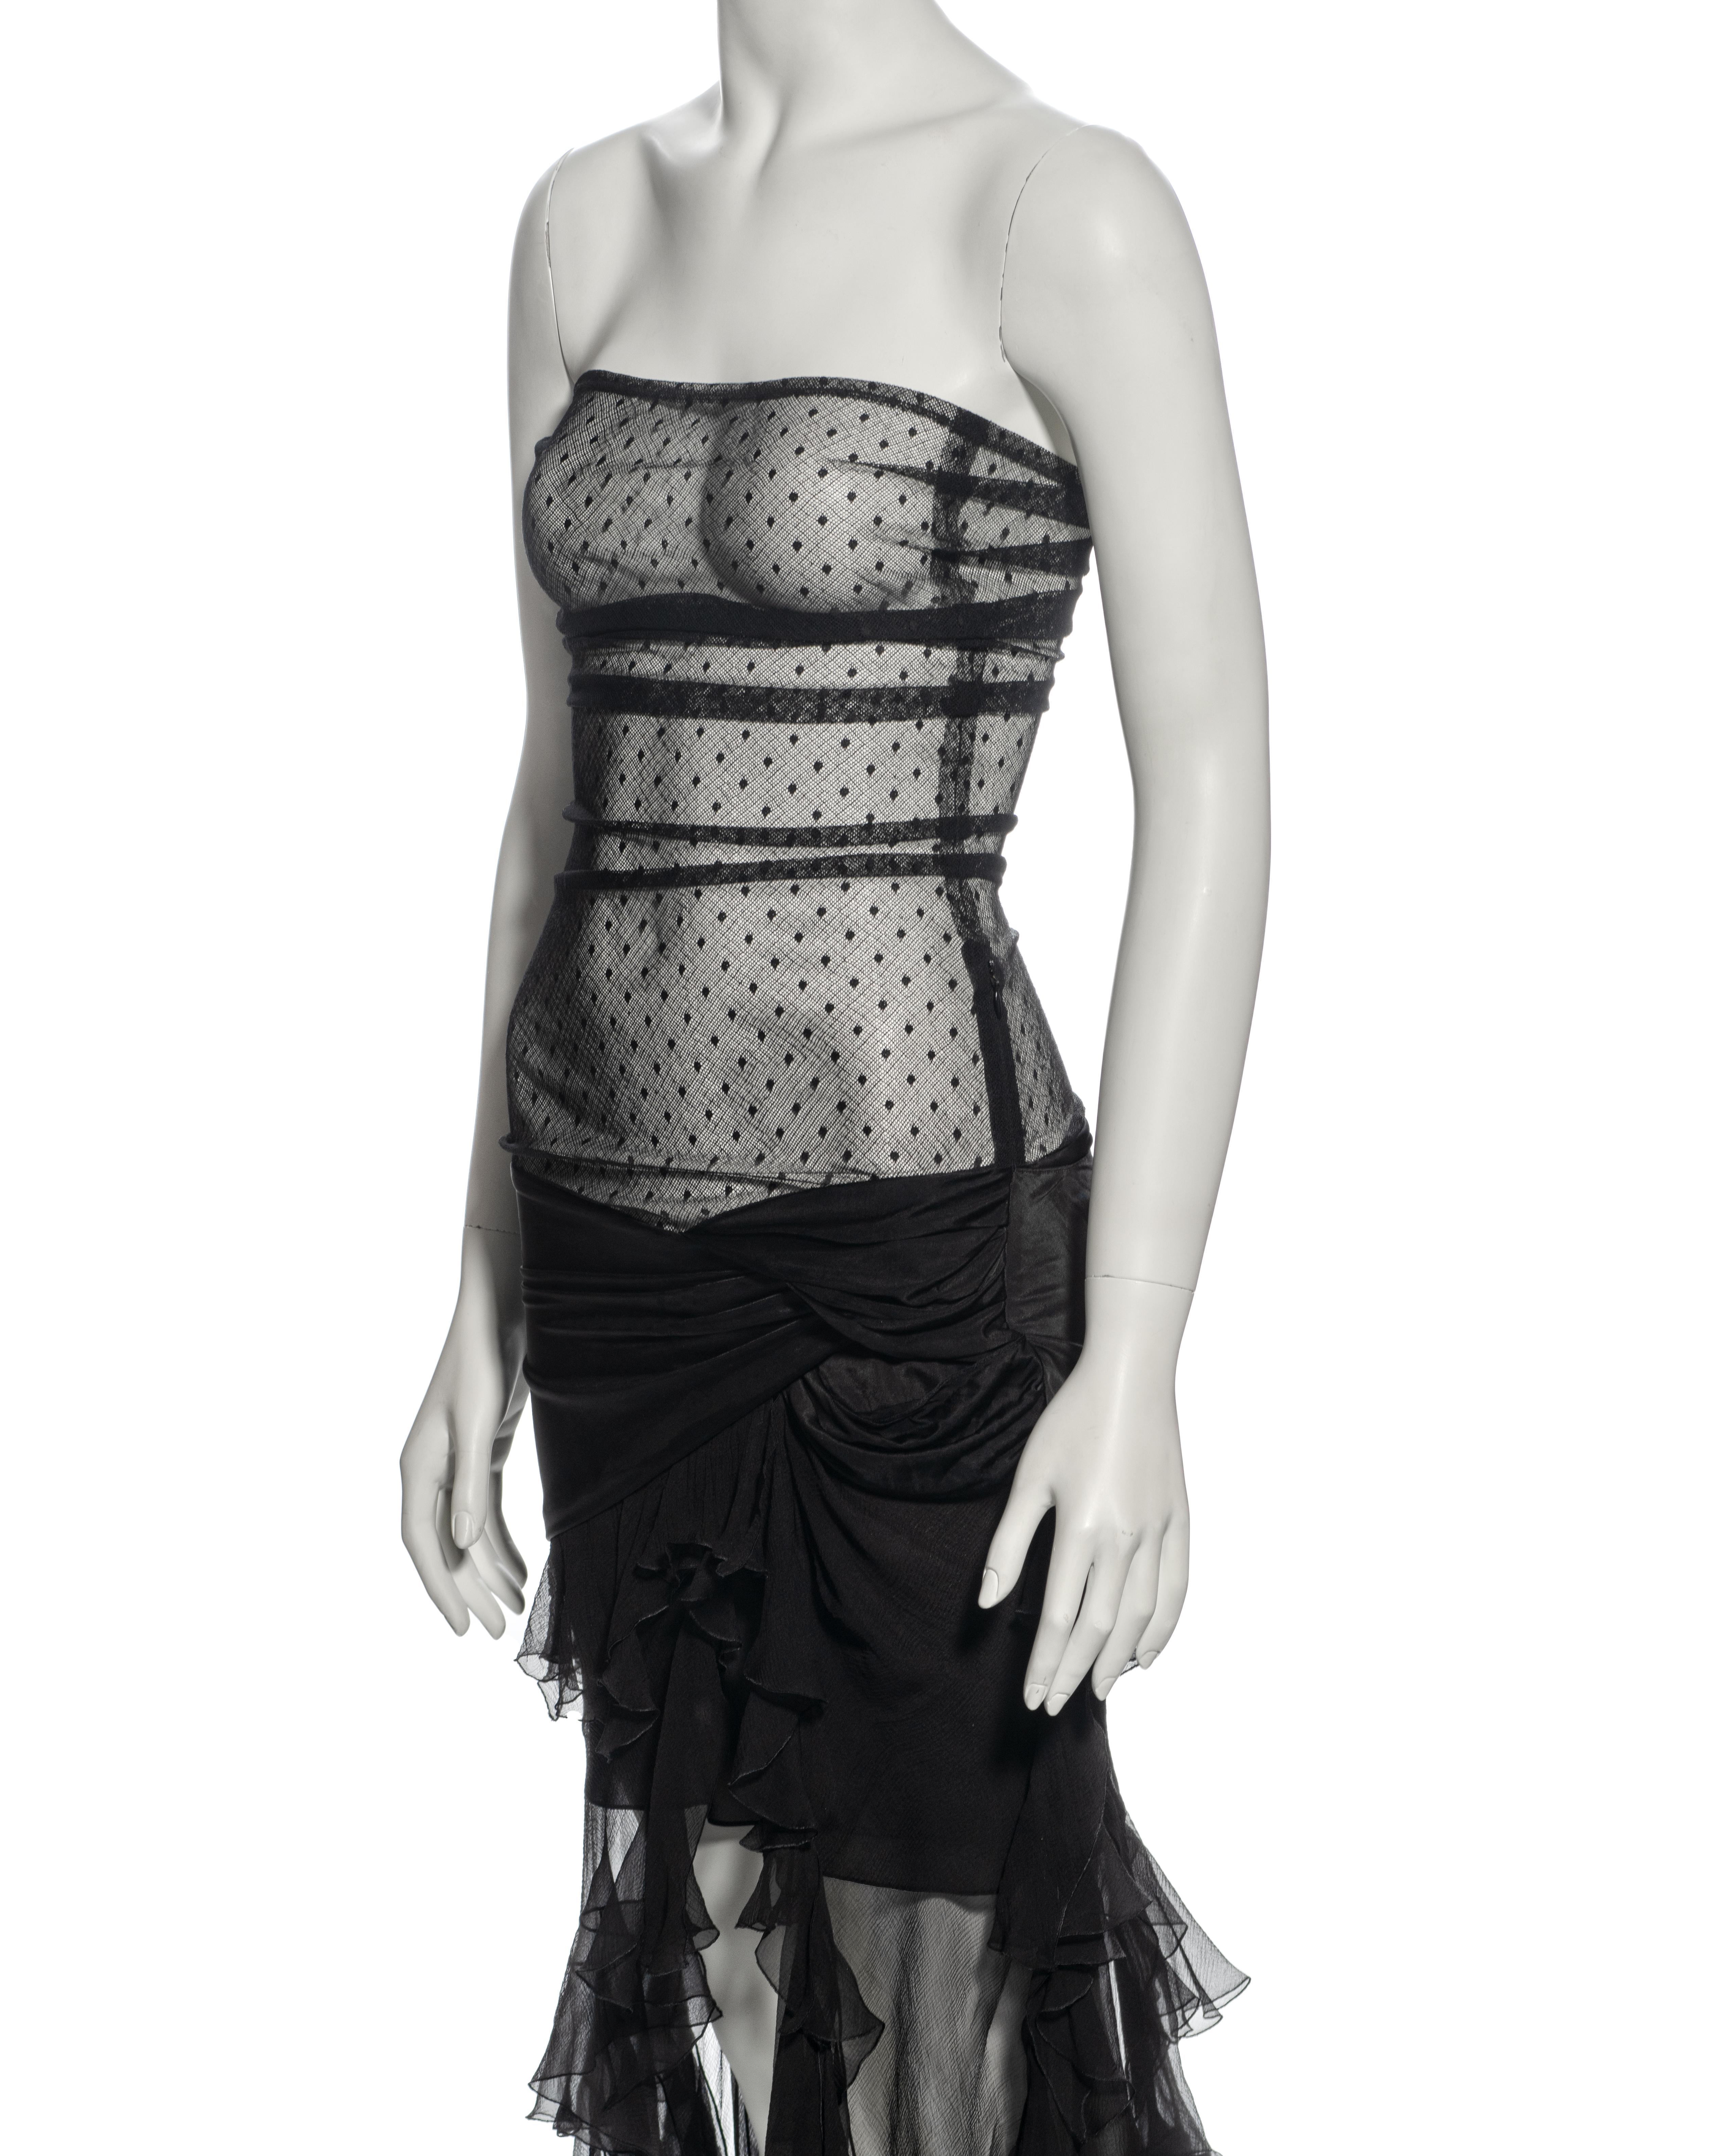 Christian Dior by John Galliano Black Strapless Silk and Mesh Dress, ss 2004 For Sale 4